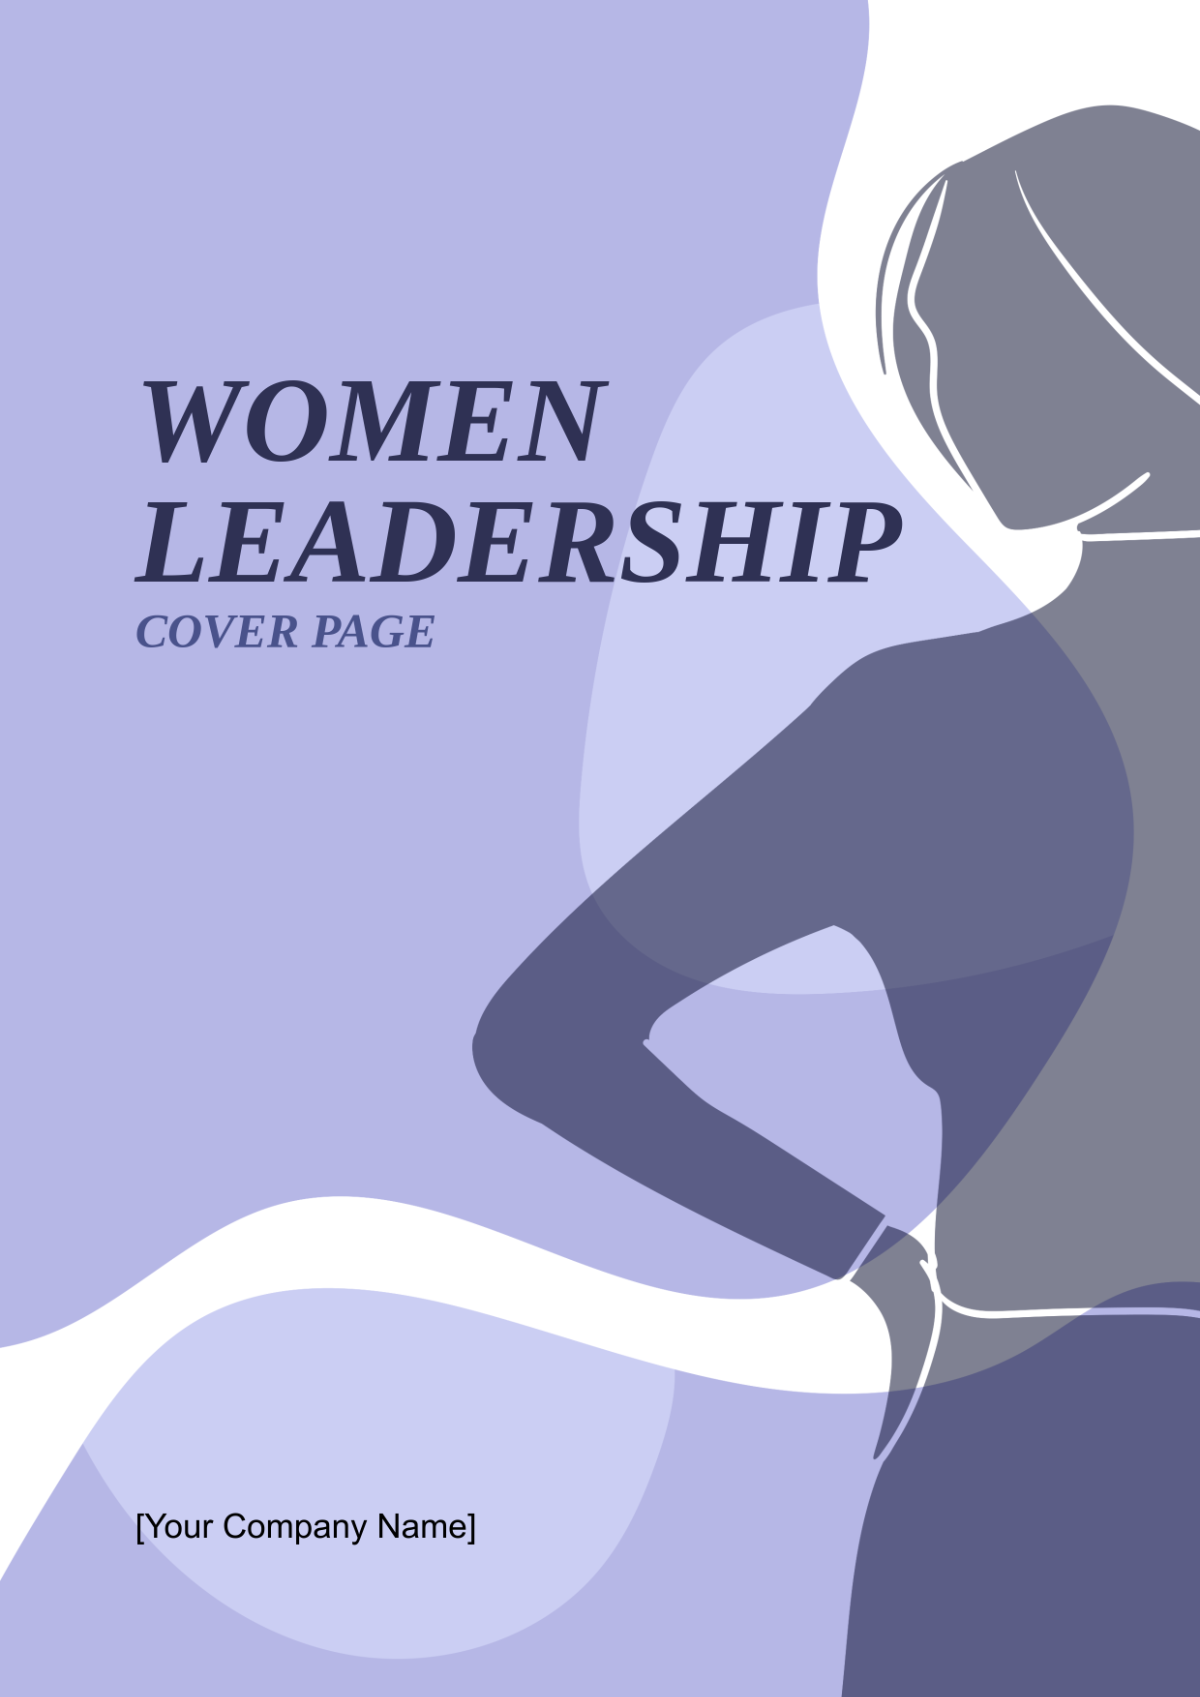 Women Leadership Cover Page Template